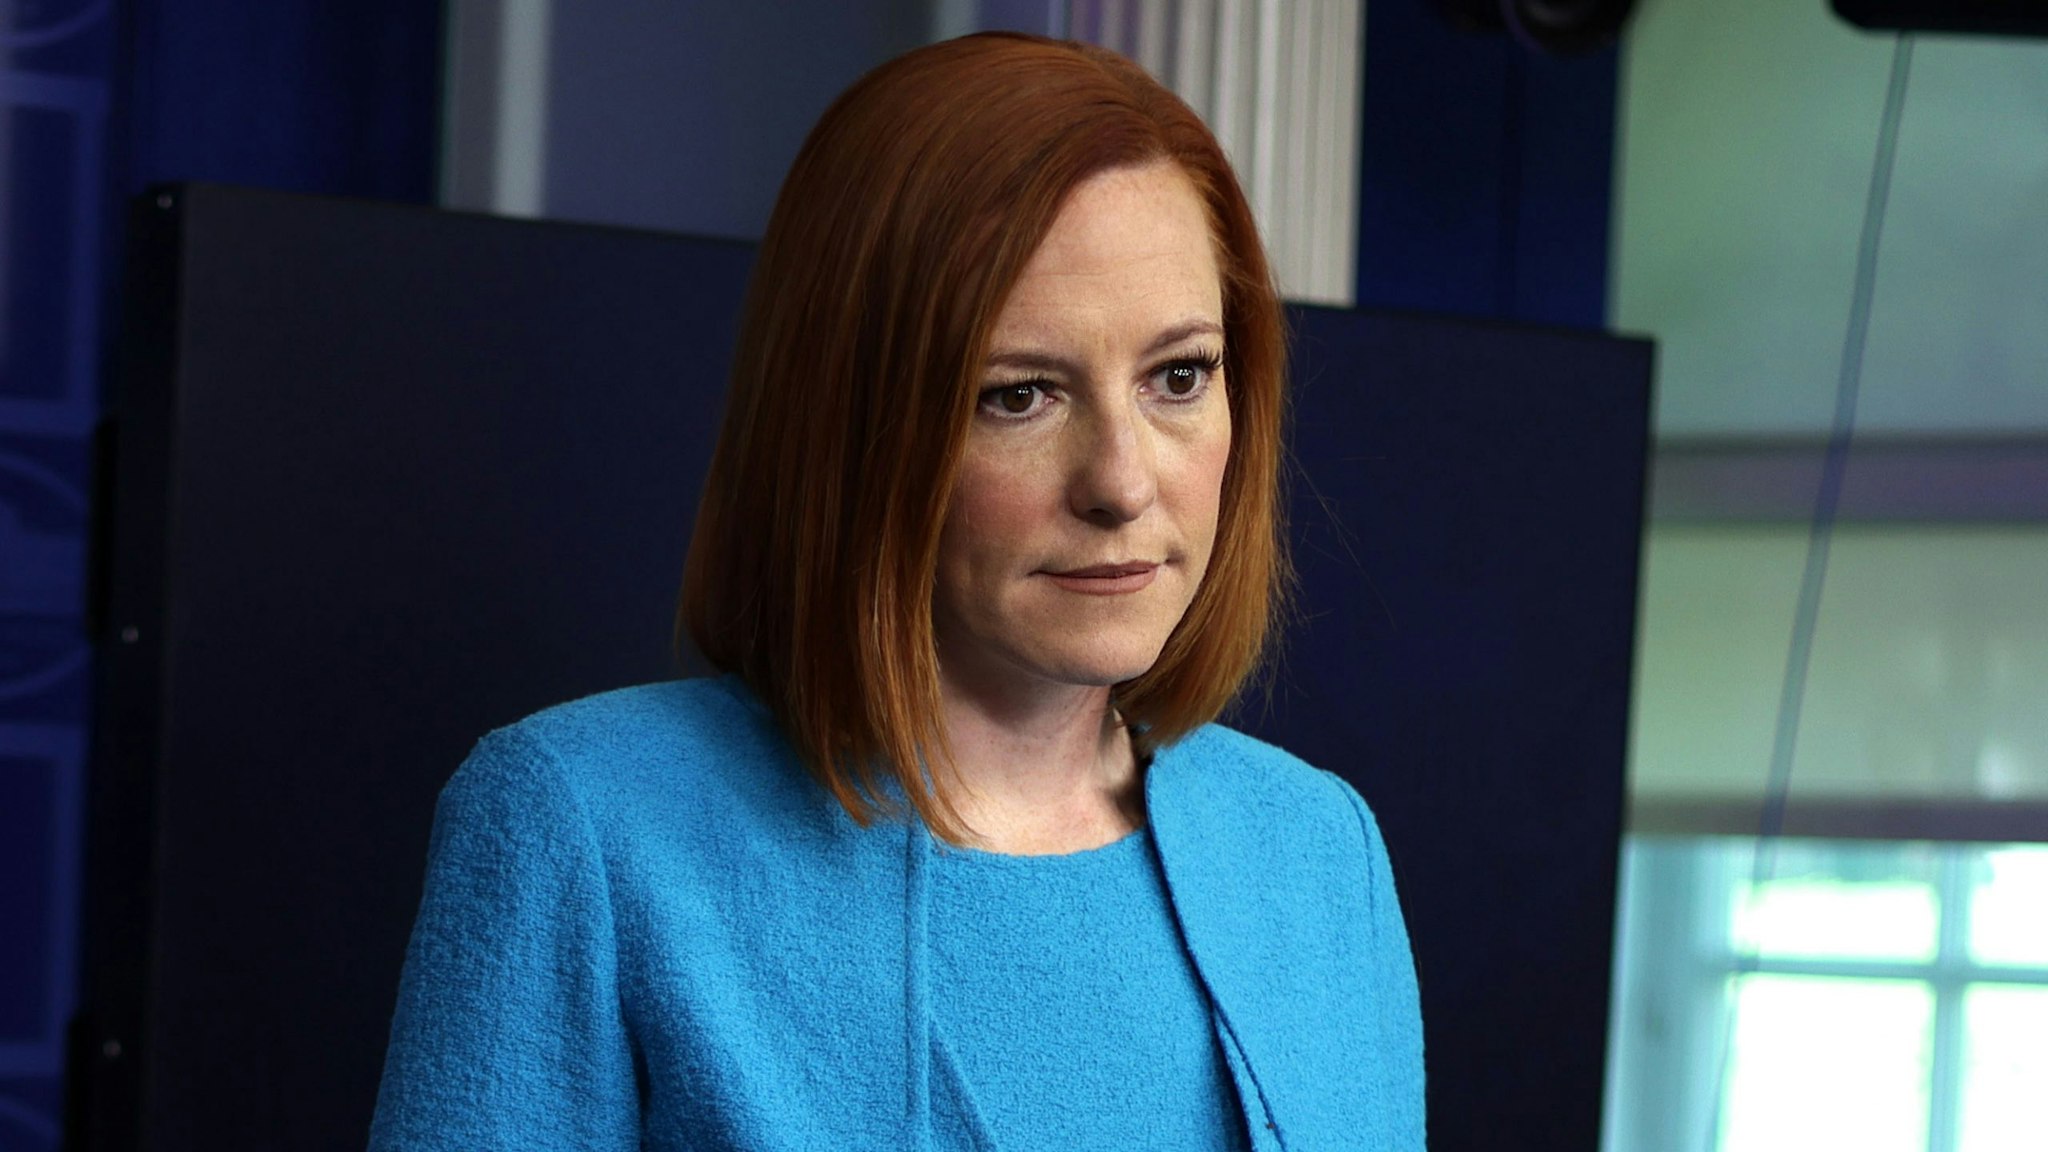 WASHINGTON, DC - MAY 13: White House Press Secretary Jen Psaki listens during a daily press briefing at the James Brady Press Briefing Room of the White House May 13, 2021 in Washington, DC. Psaki held a daily news briefing to answer questions from members of the press.